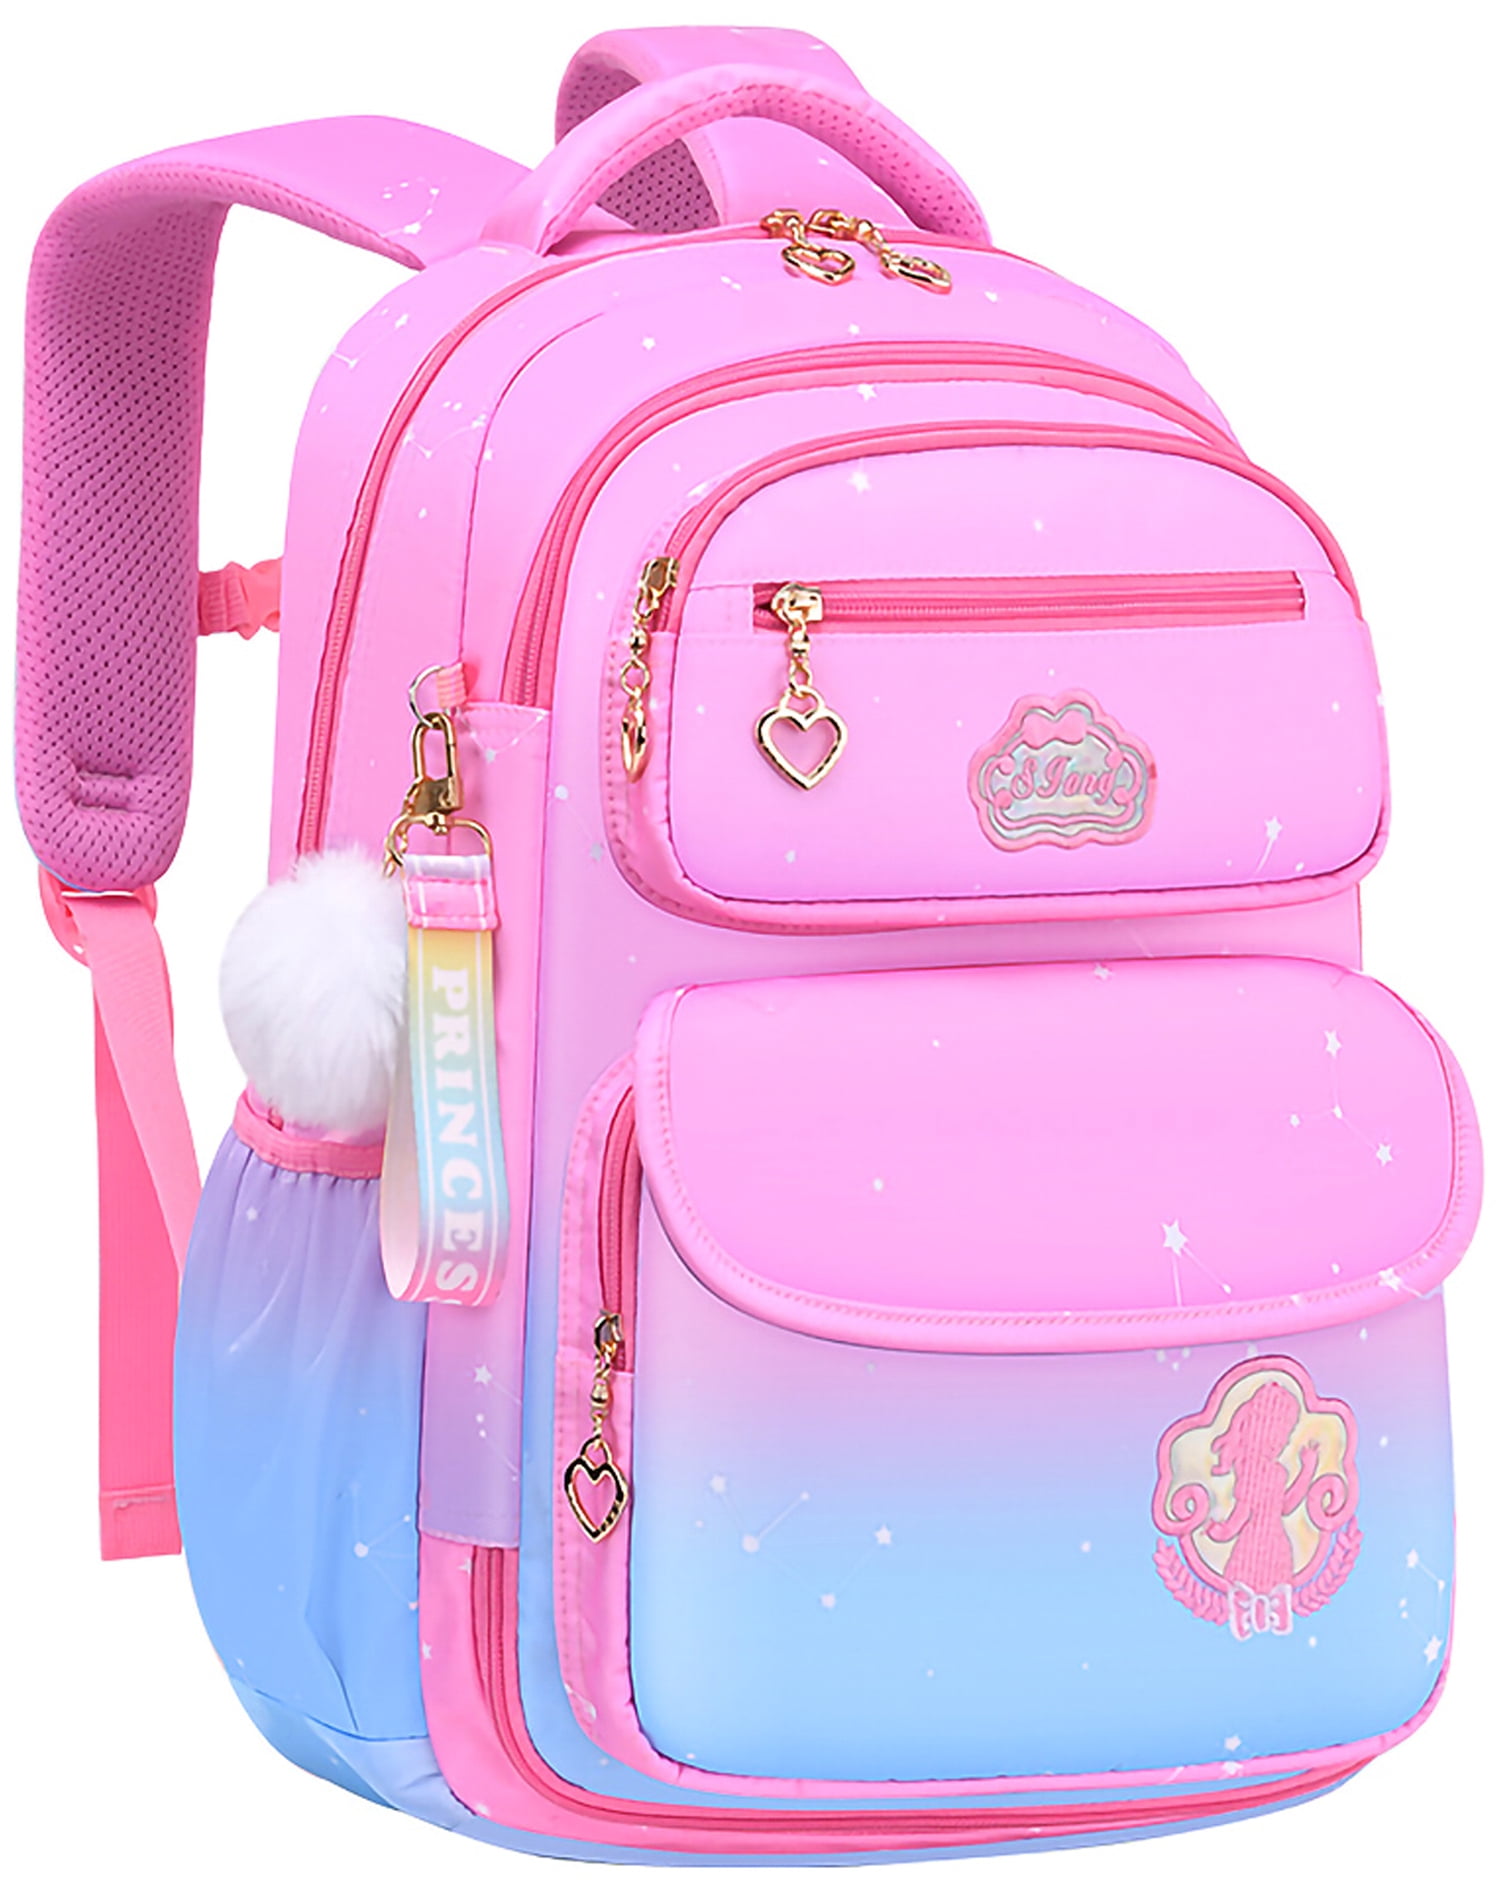 Jansport Driver 8 - Neon Daisy - Just Bags Luggage Center